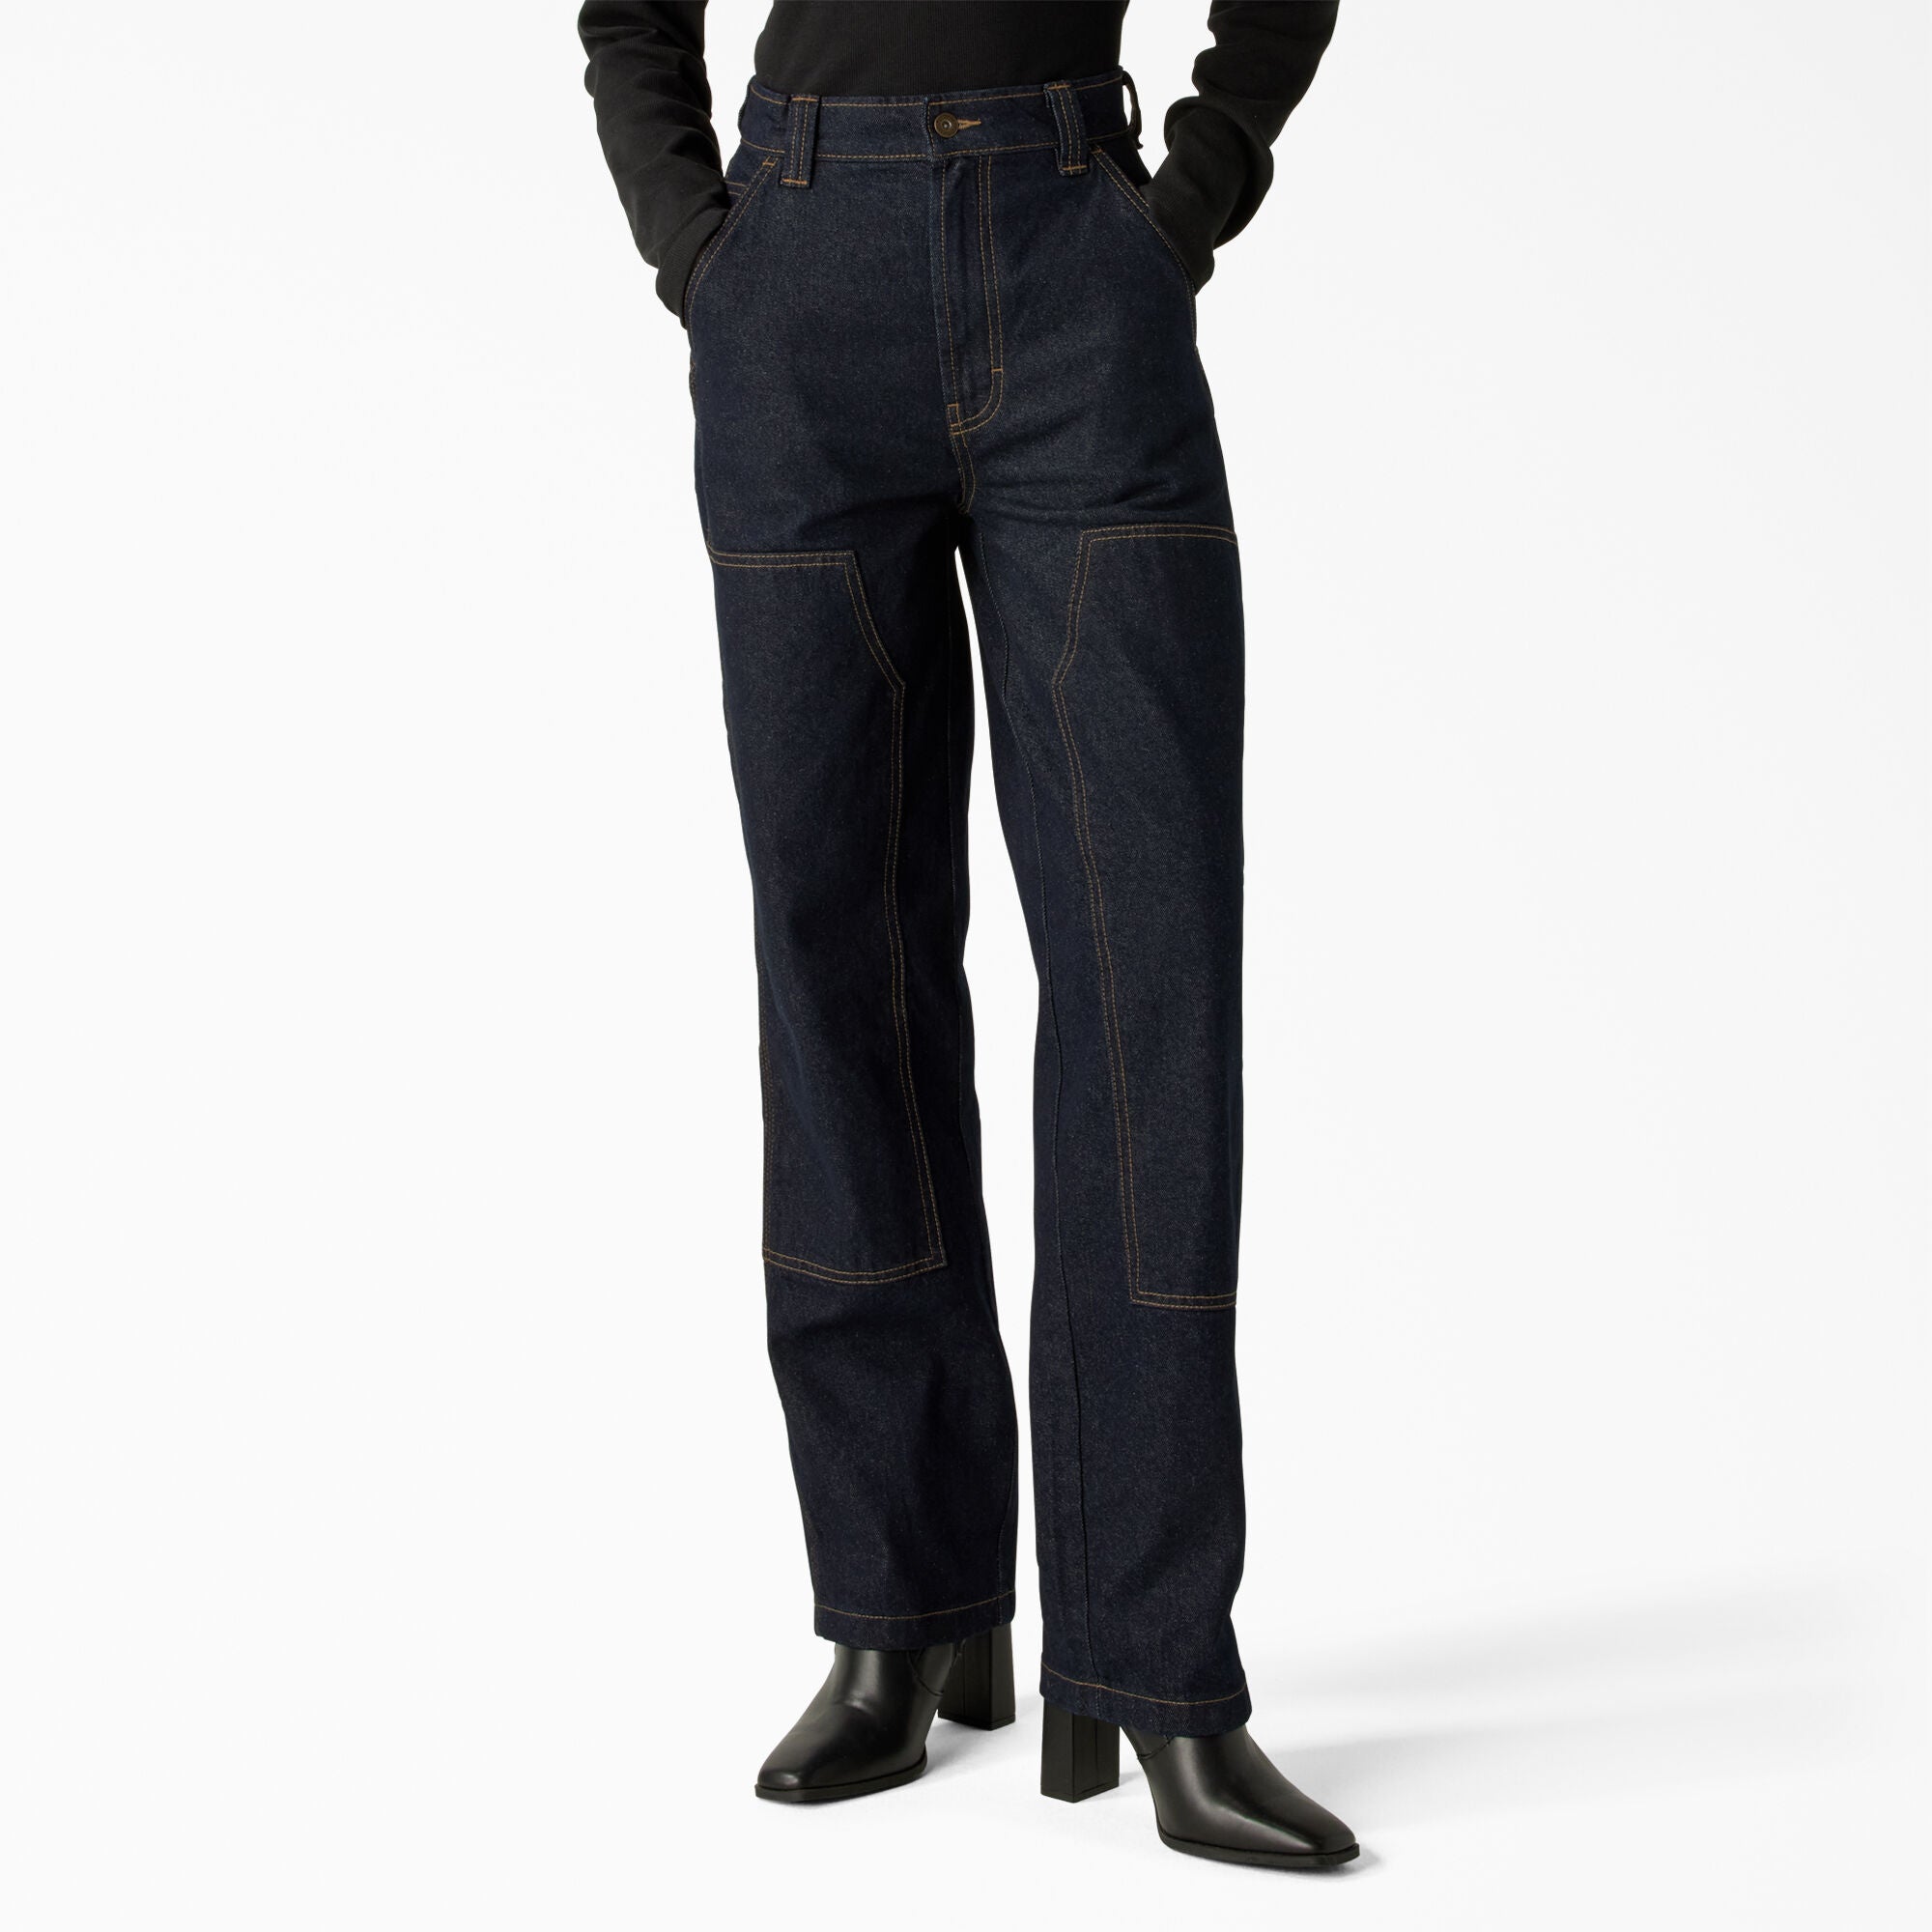 Madison Loose Fit Double Knee Jeans - Rinsed Indigo Blue